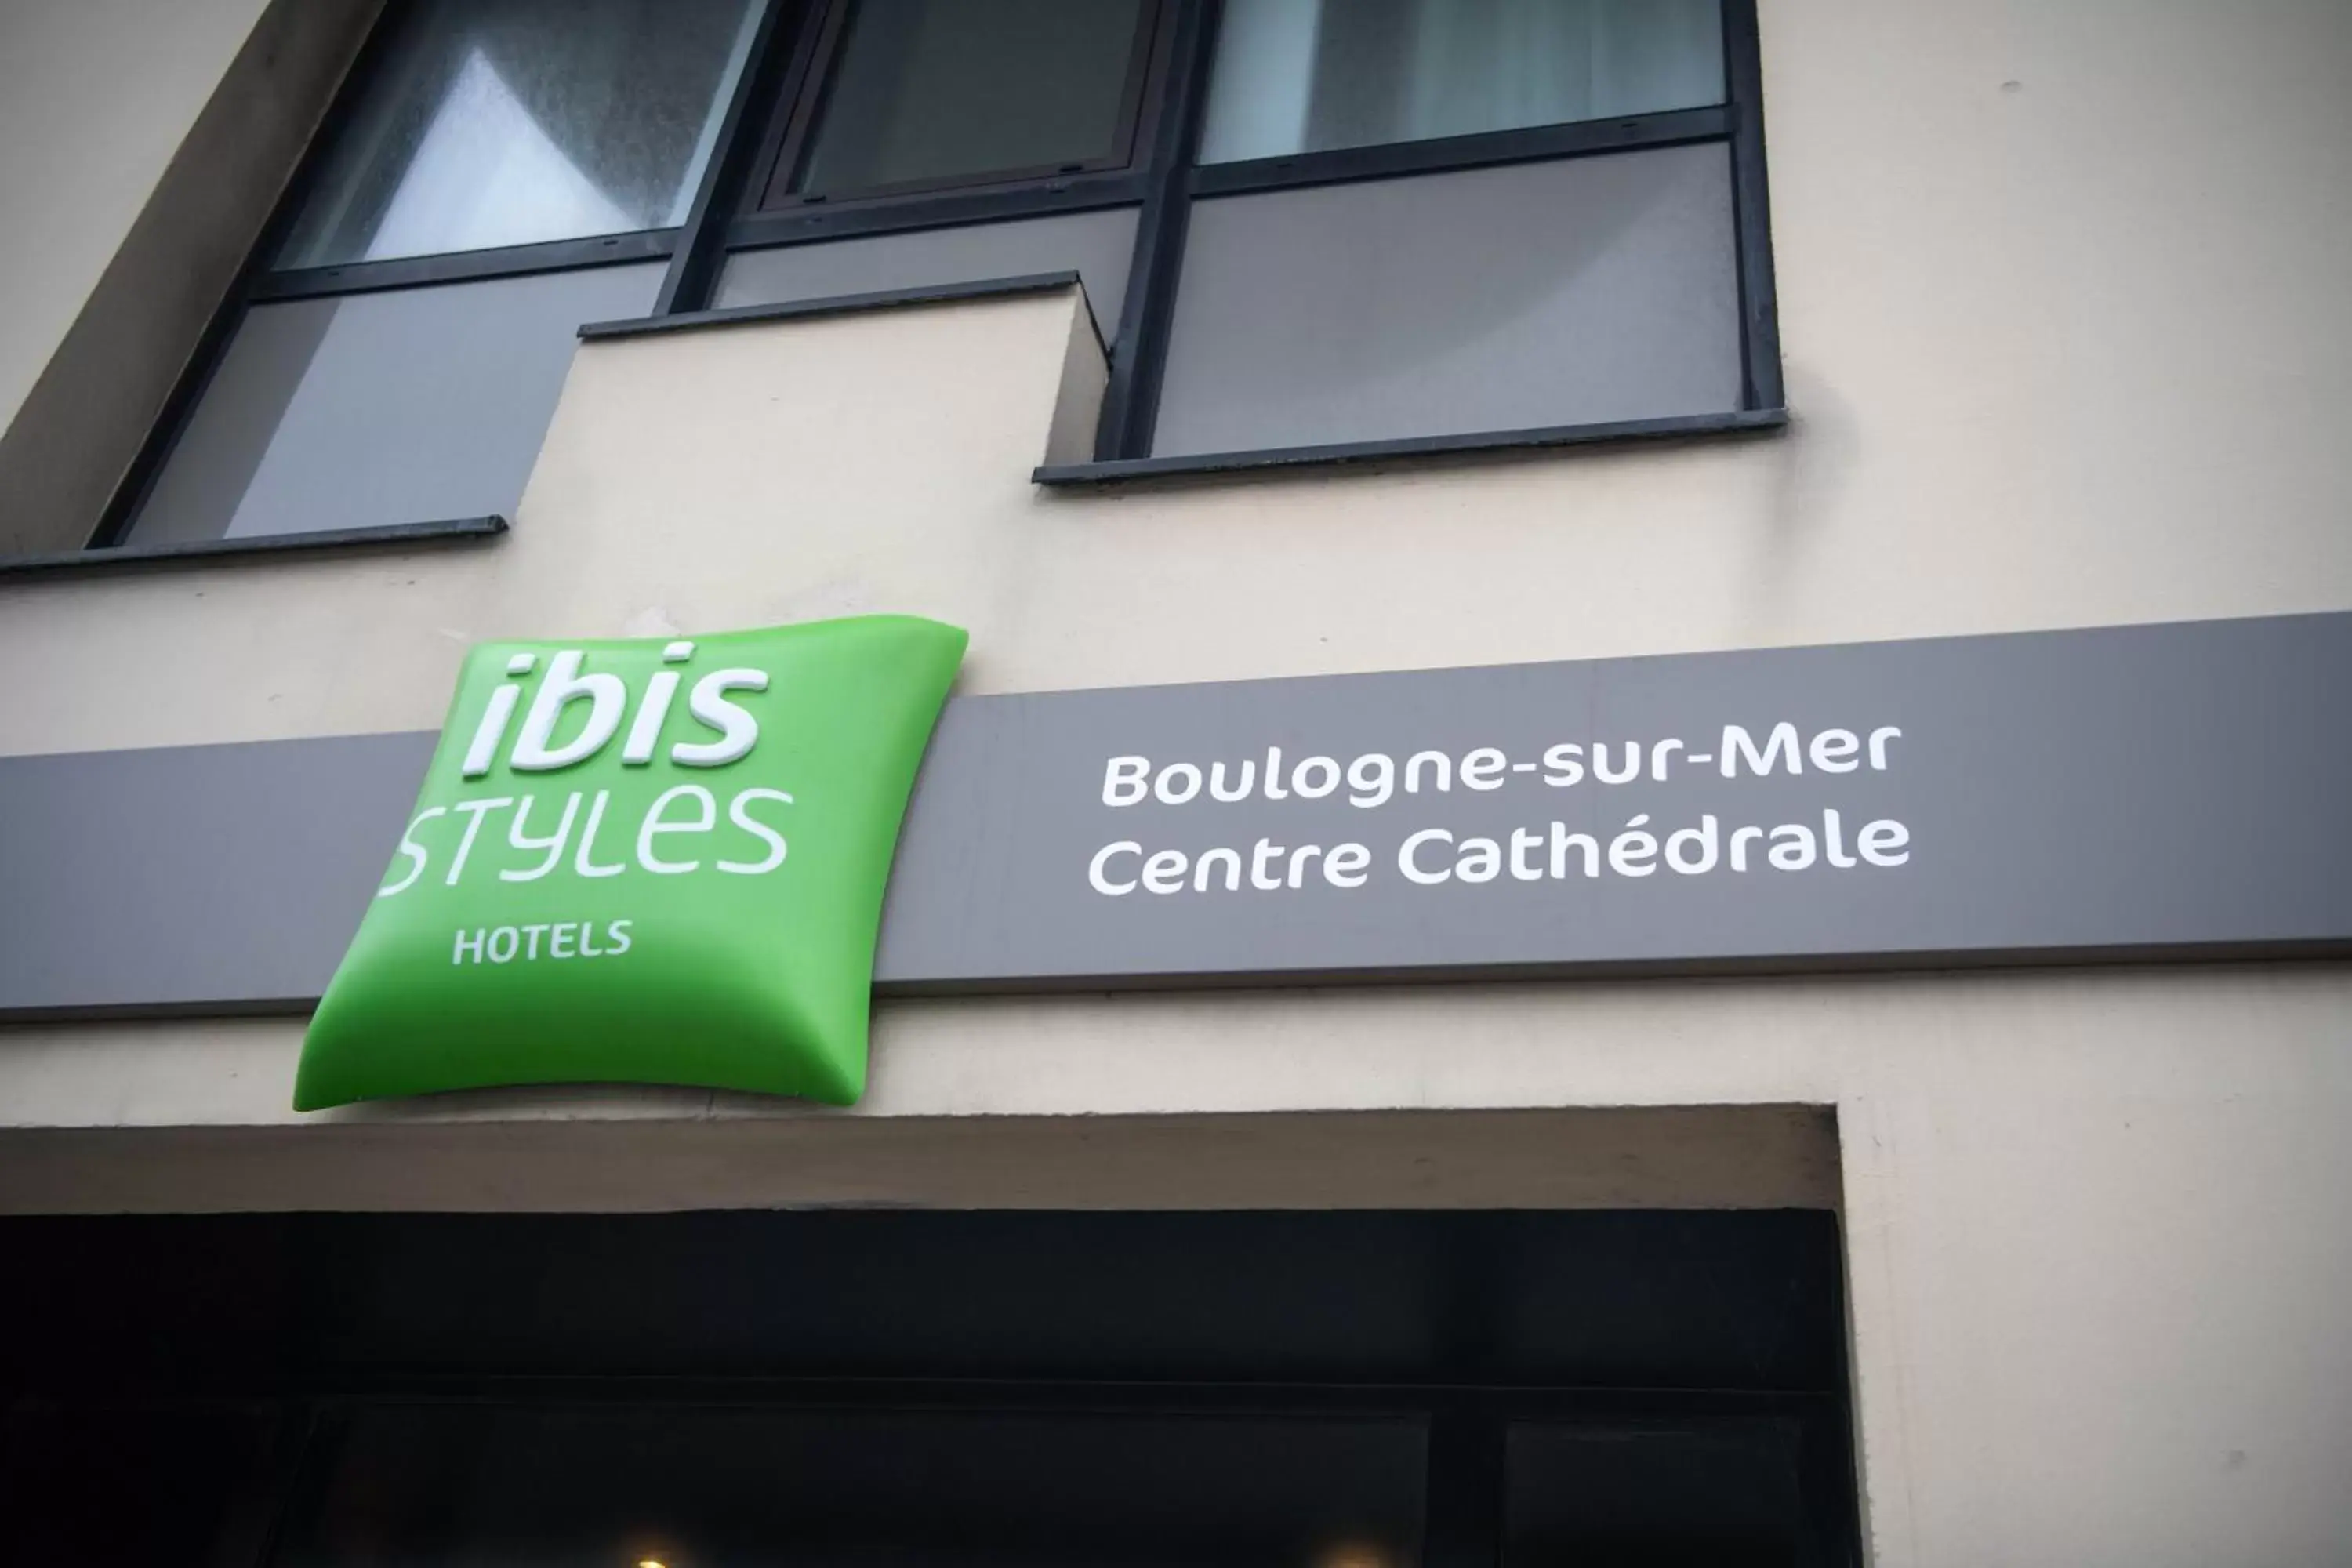 Property logo or sign in ibis Styles Boulogne sur Mer Centre Cathédrale